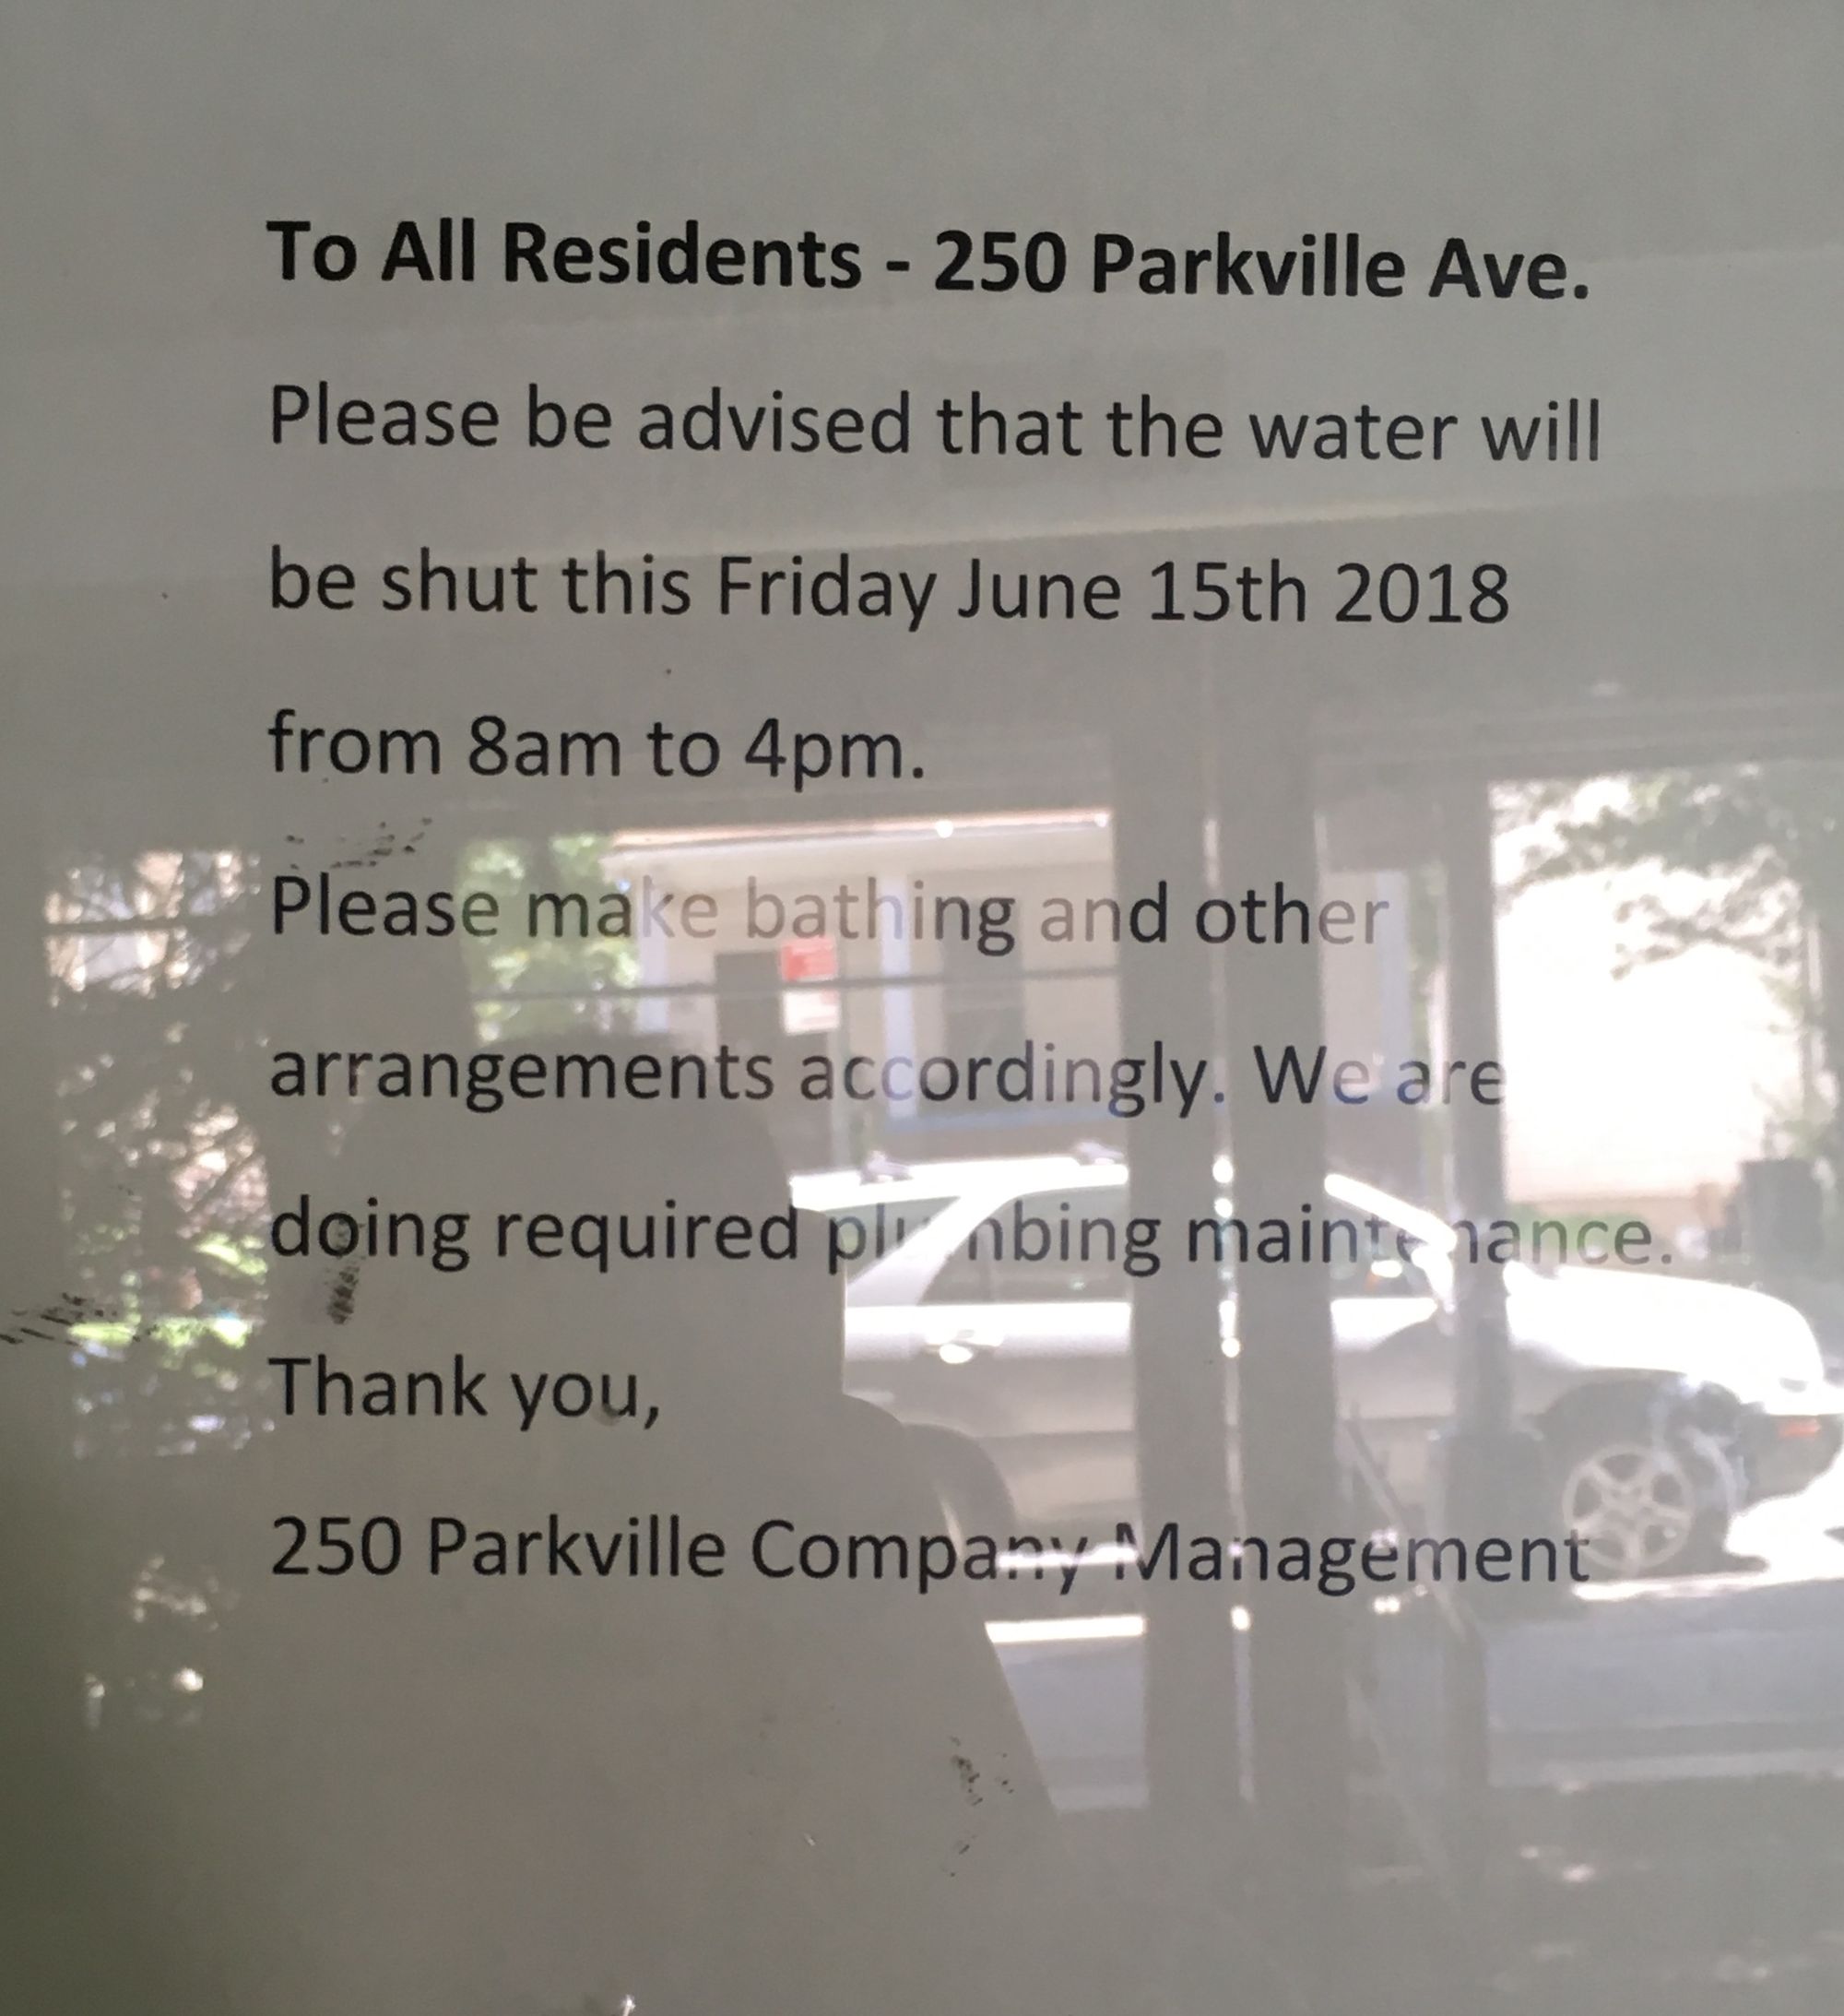 UPDATED – Water will not shut down in this building on Eid Al-Fitr